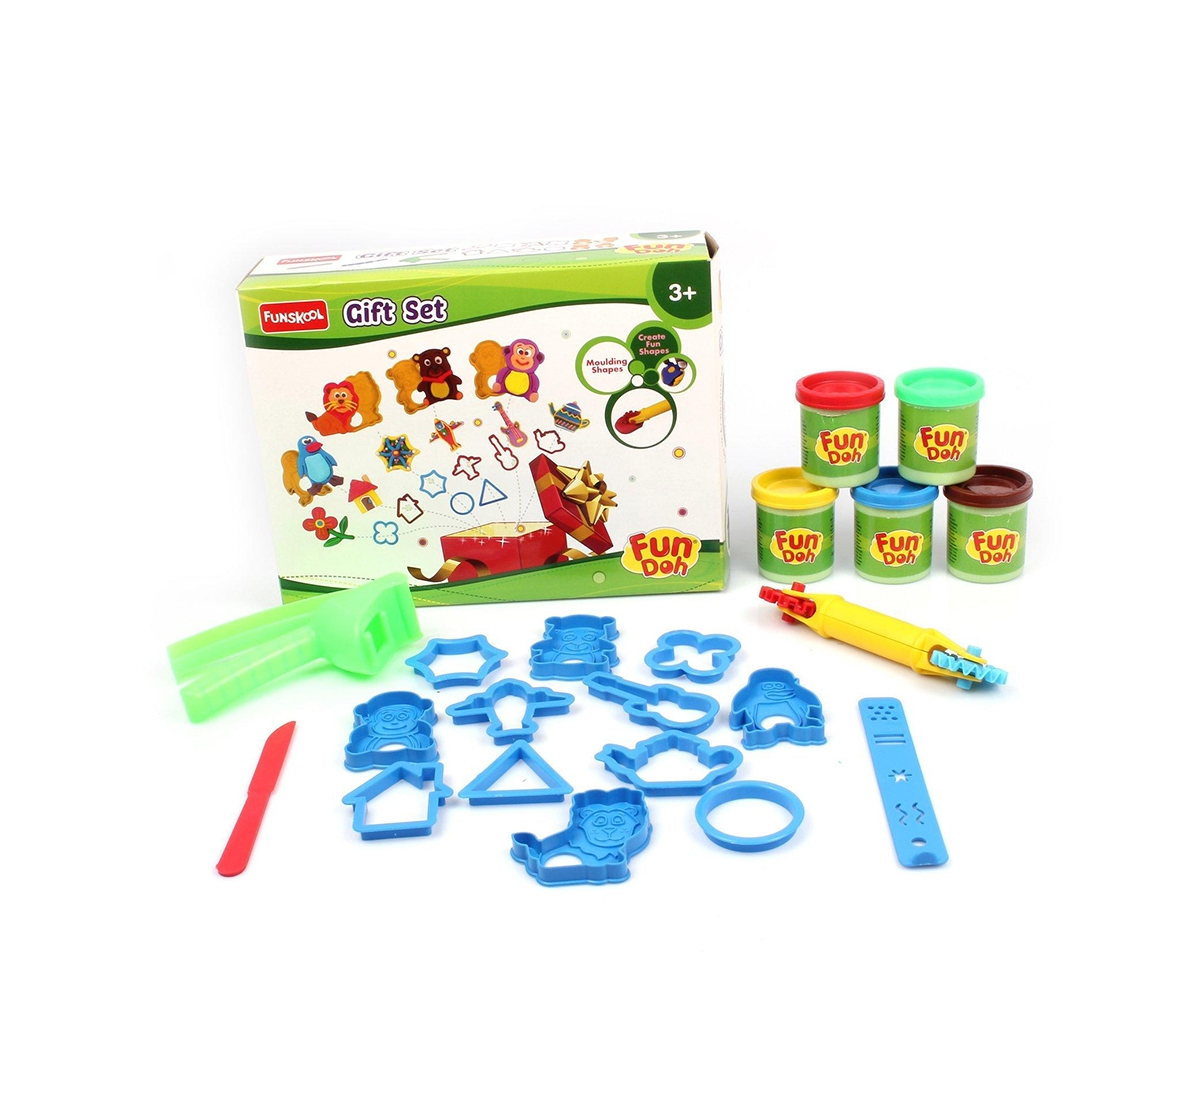 Play-Doh Party Pack Toy Non-Toxic Art Kit (3+ Years) Price - Buy Online at  Best Price in India